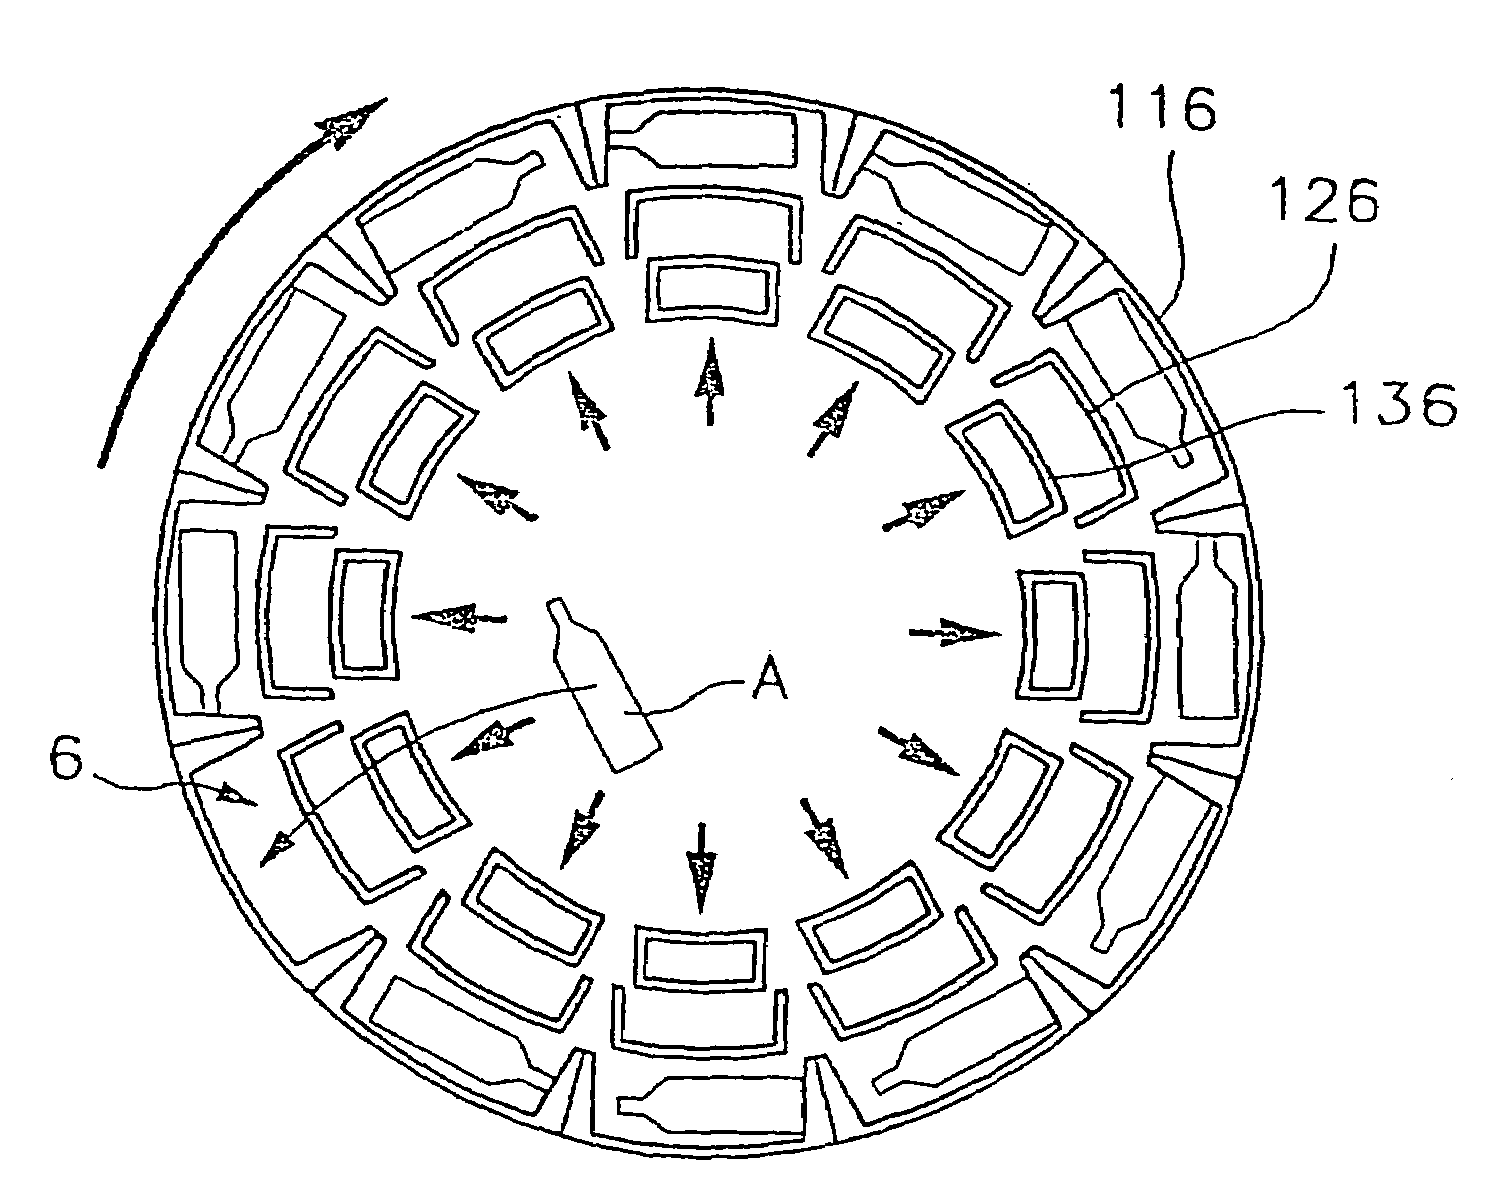 Adaptable automatic machine for the orientation and aligned supply of lightweight hollow articles